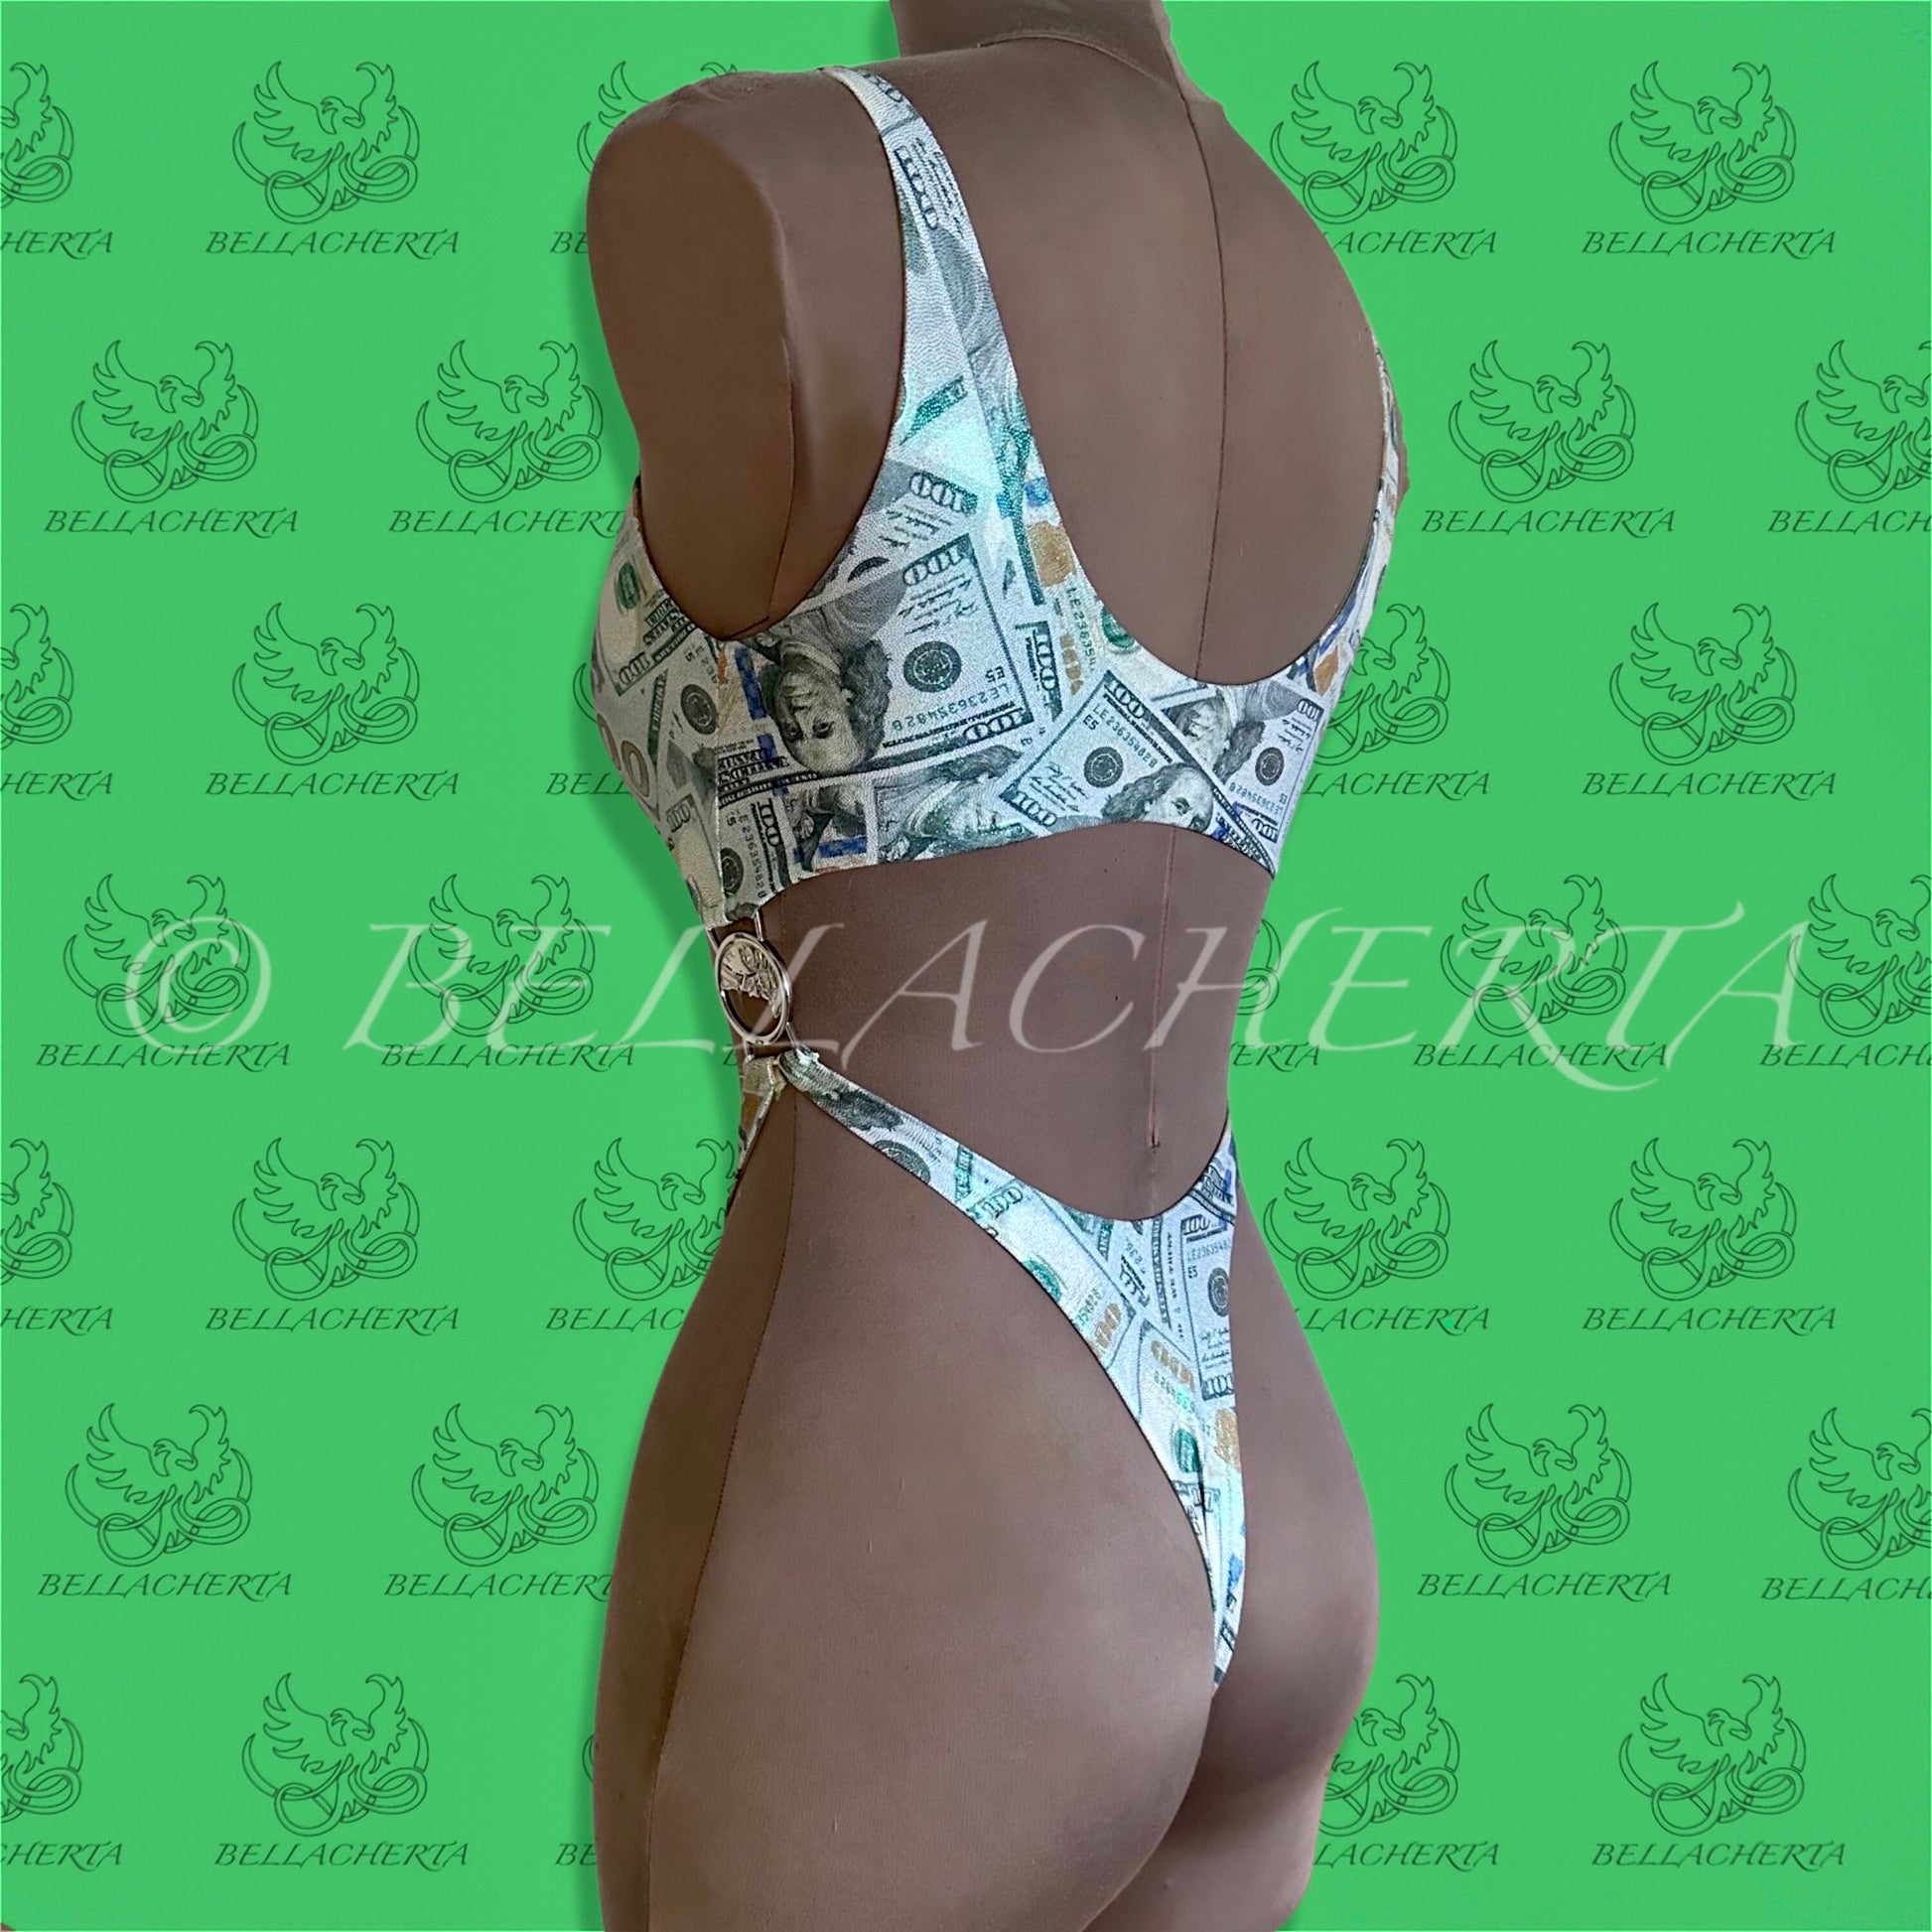 Bellacherta Printed Fabric One-piece Cutout Swimsuit With Silver Buckles, Carnival Monday Wear, Money Print